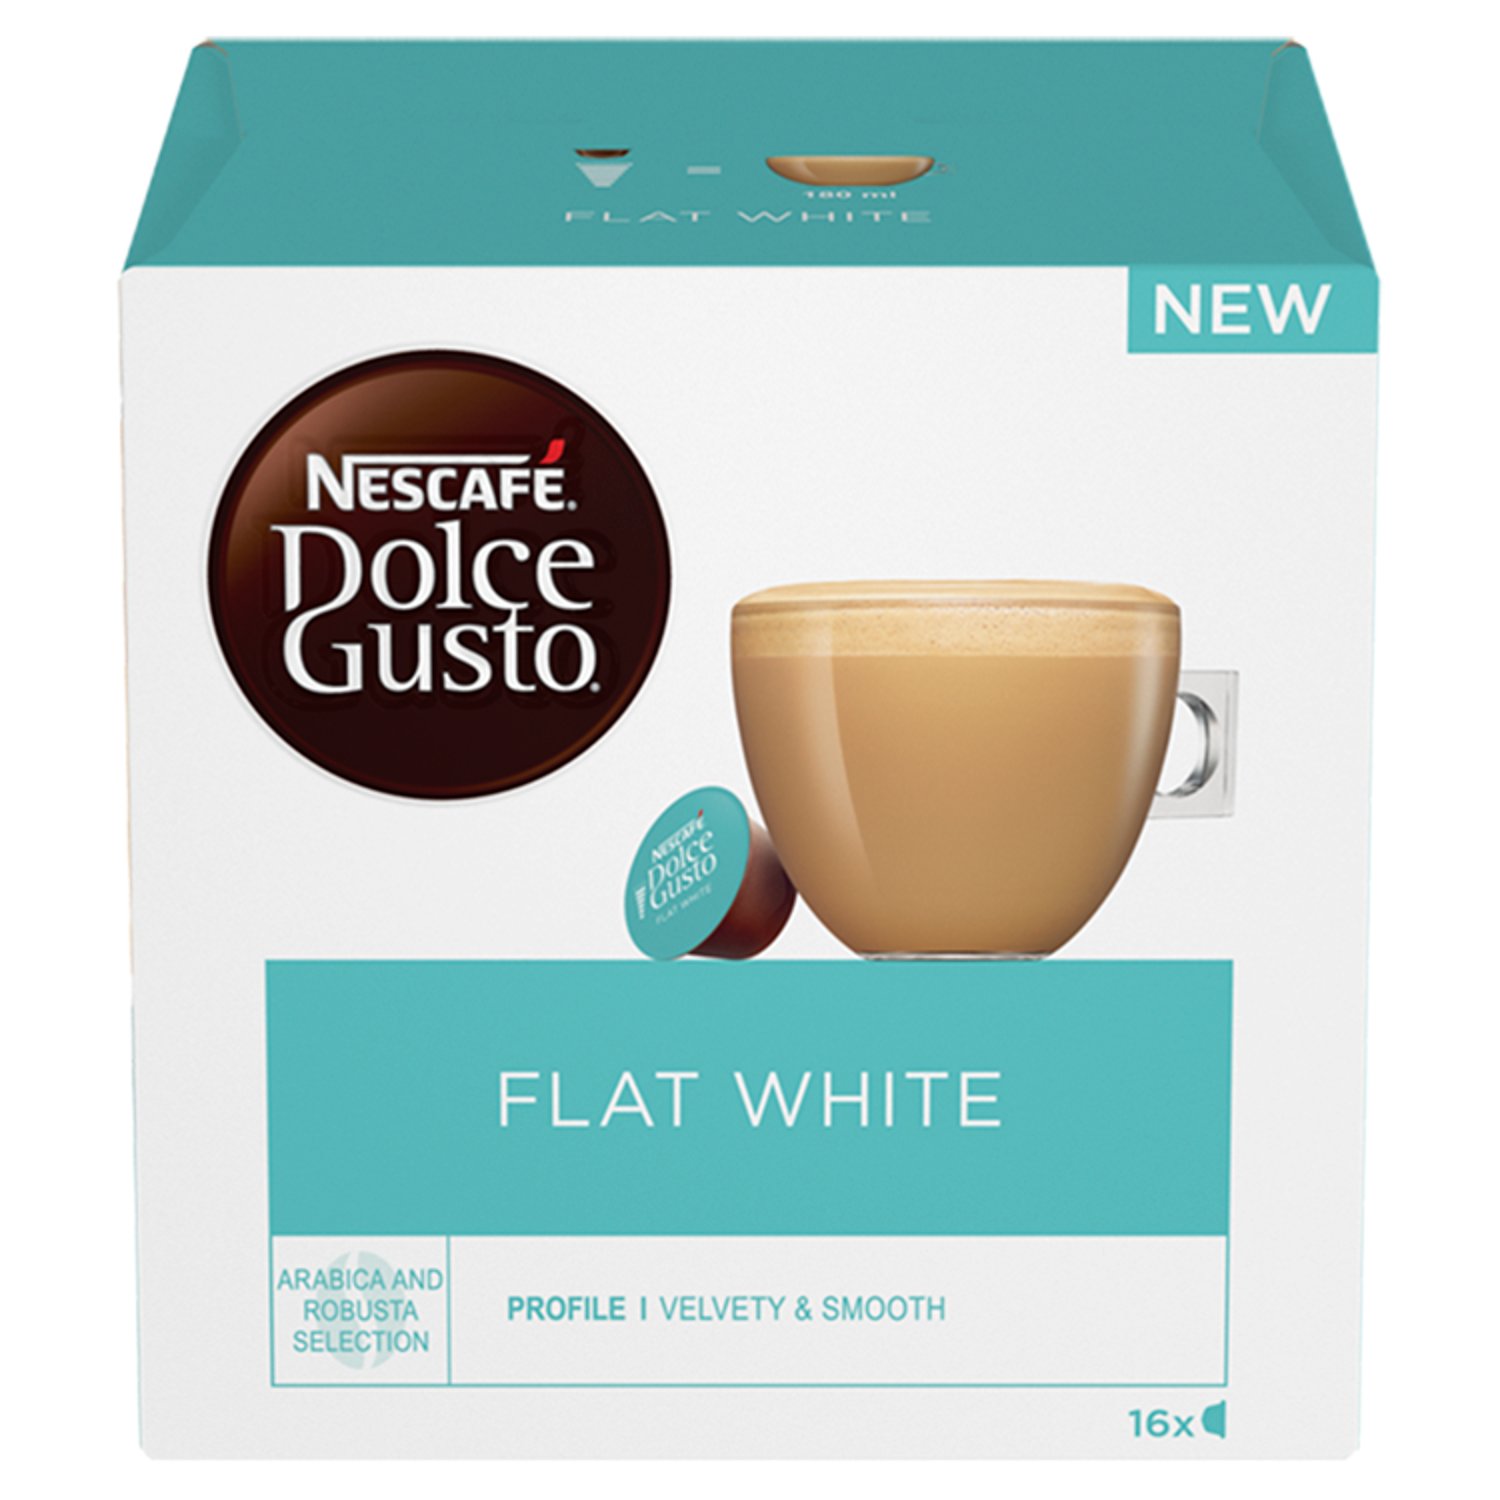 Nescafe Dolce Gusto Flat White Coffee Capsules 16 Pack (187.2 g)